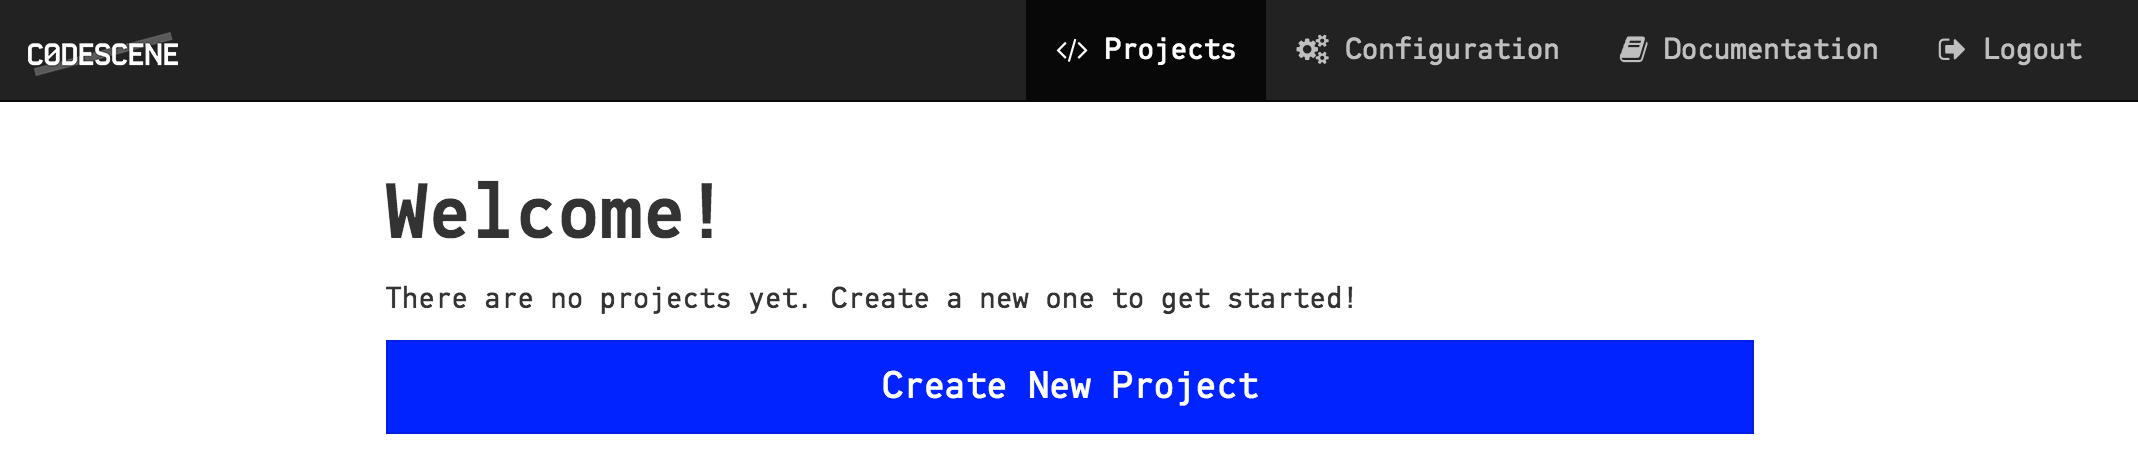 Create New Project button